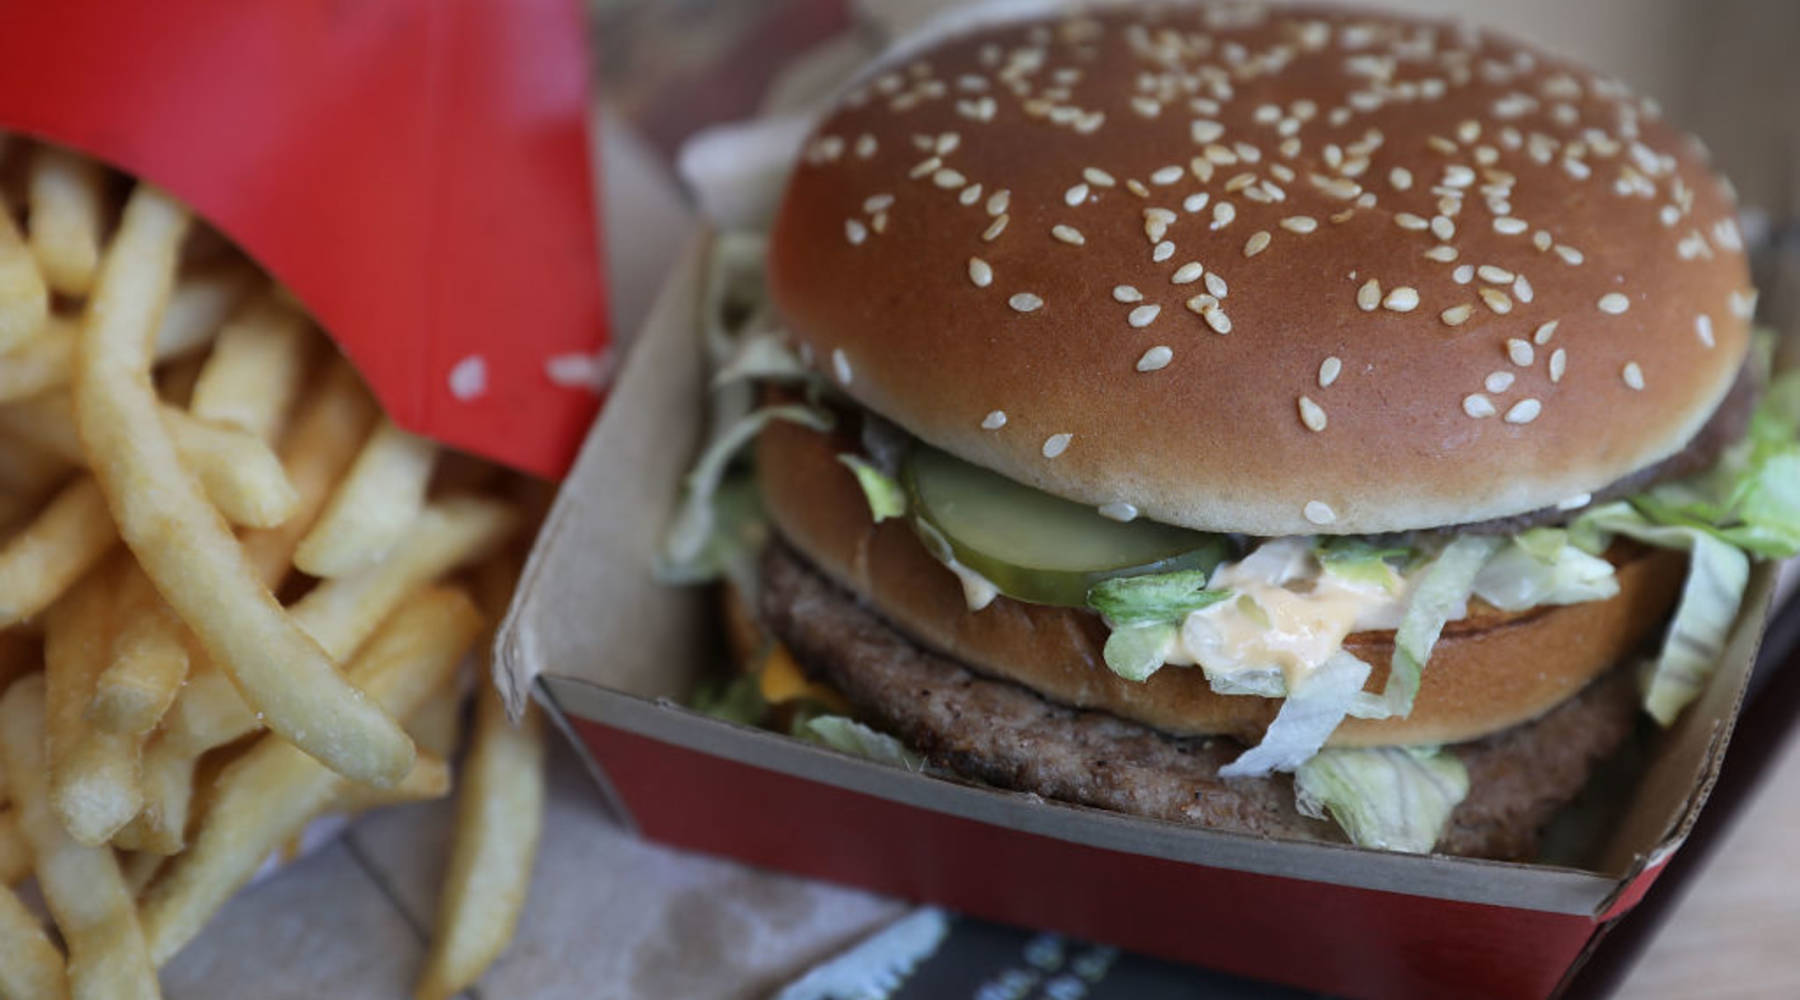 how much does it cost for a big mac today 2015